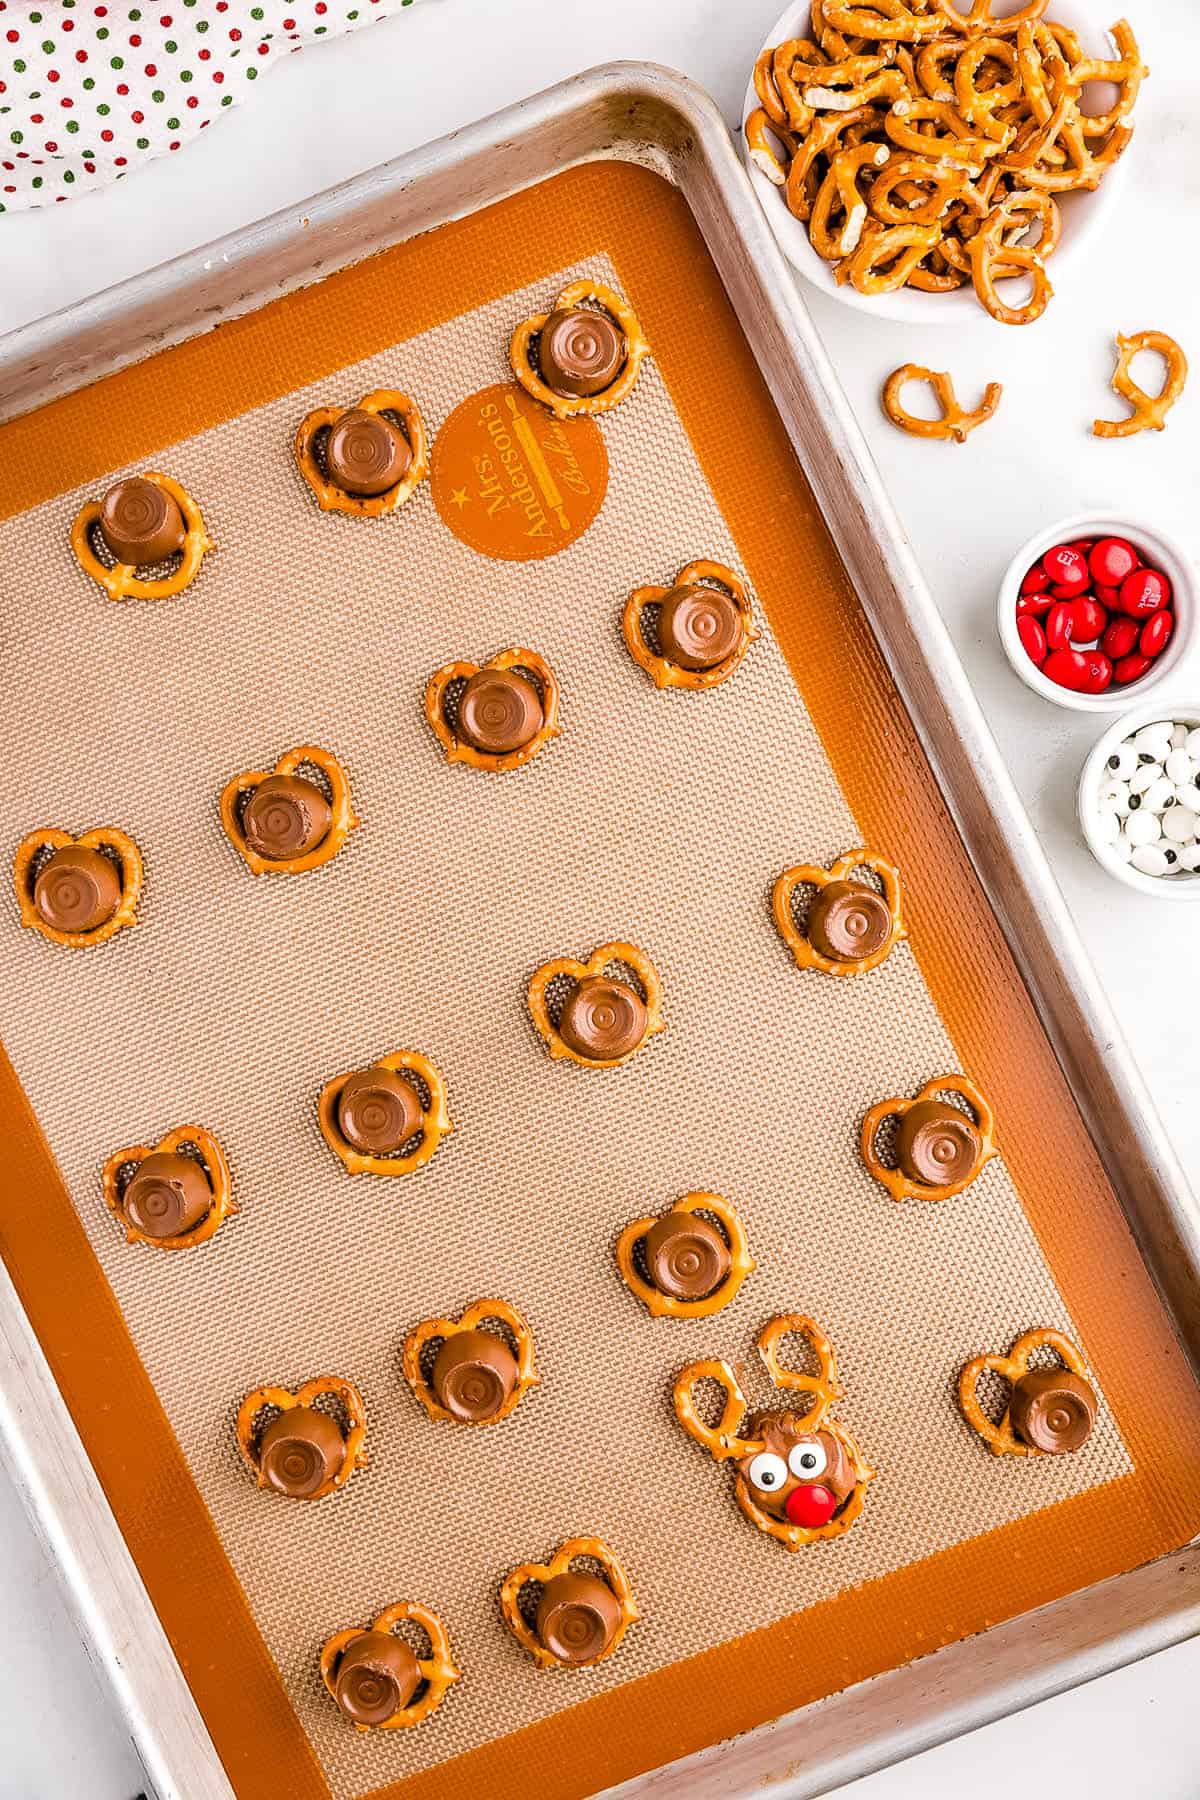 Remove from the oven and Place Googly Eyes, Nose and Antlers to each Rolo.